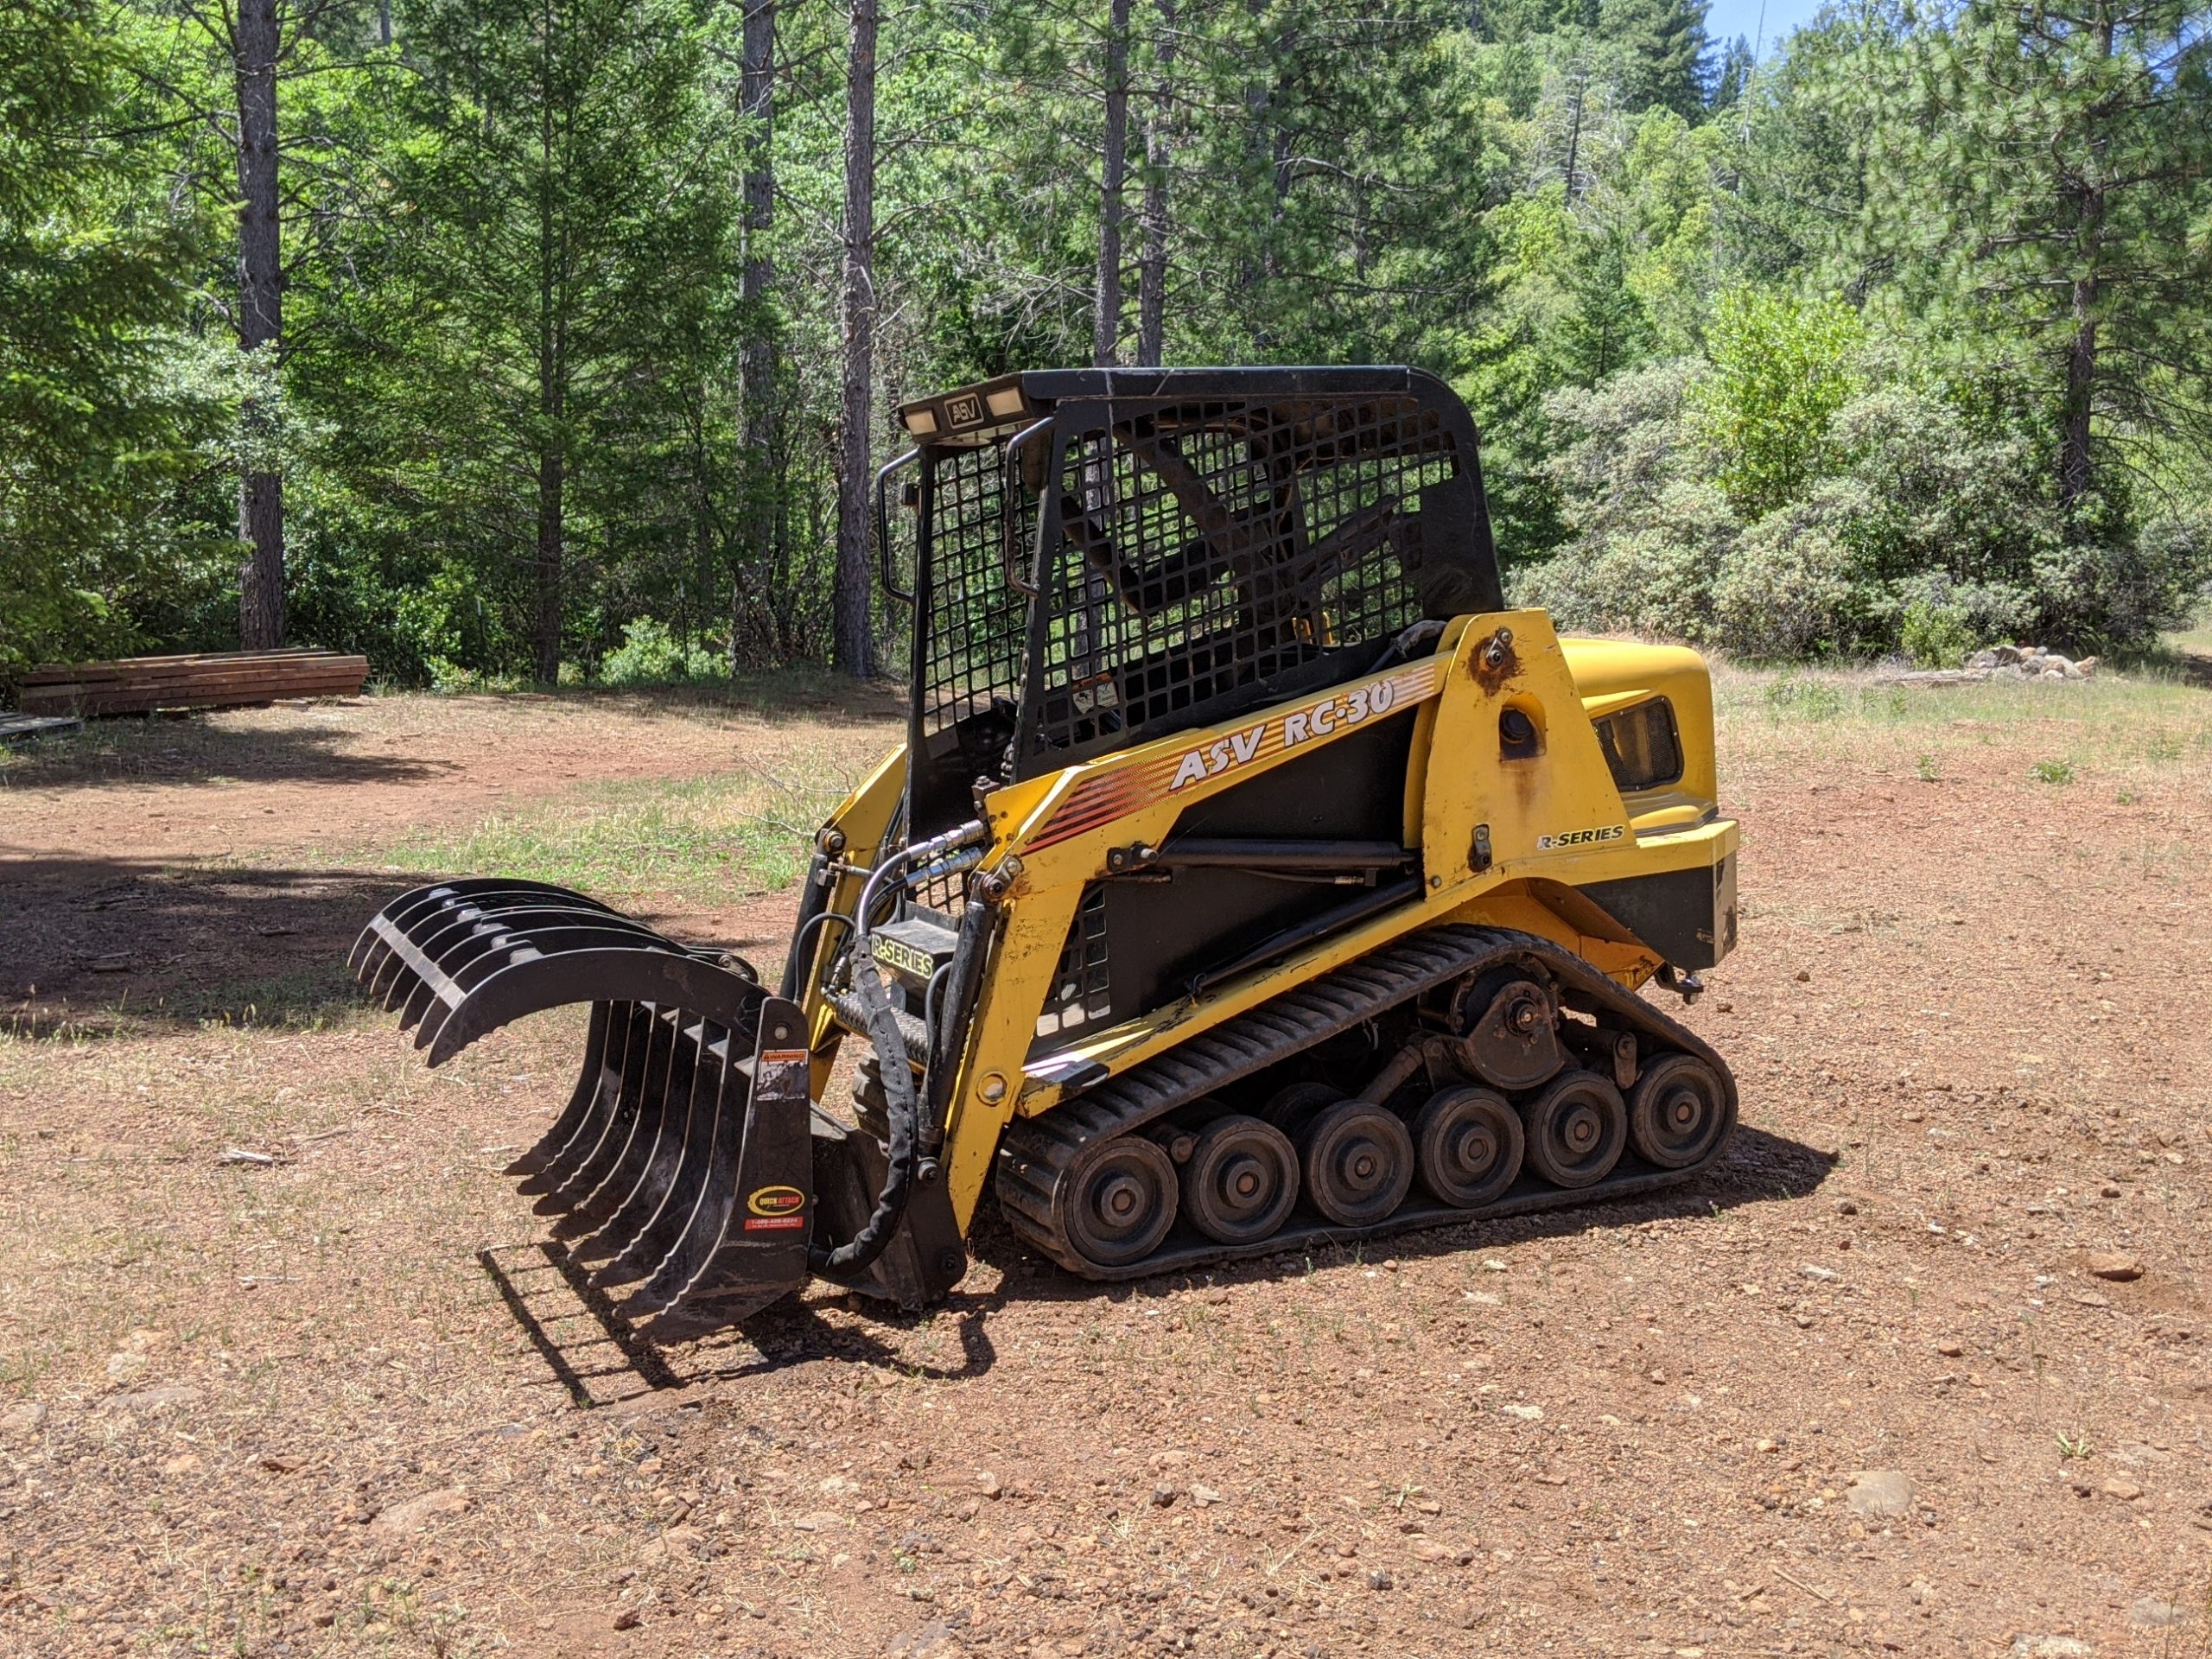 Can I start a business with a skid steer?